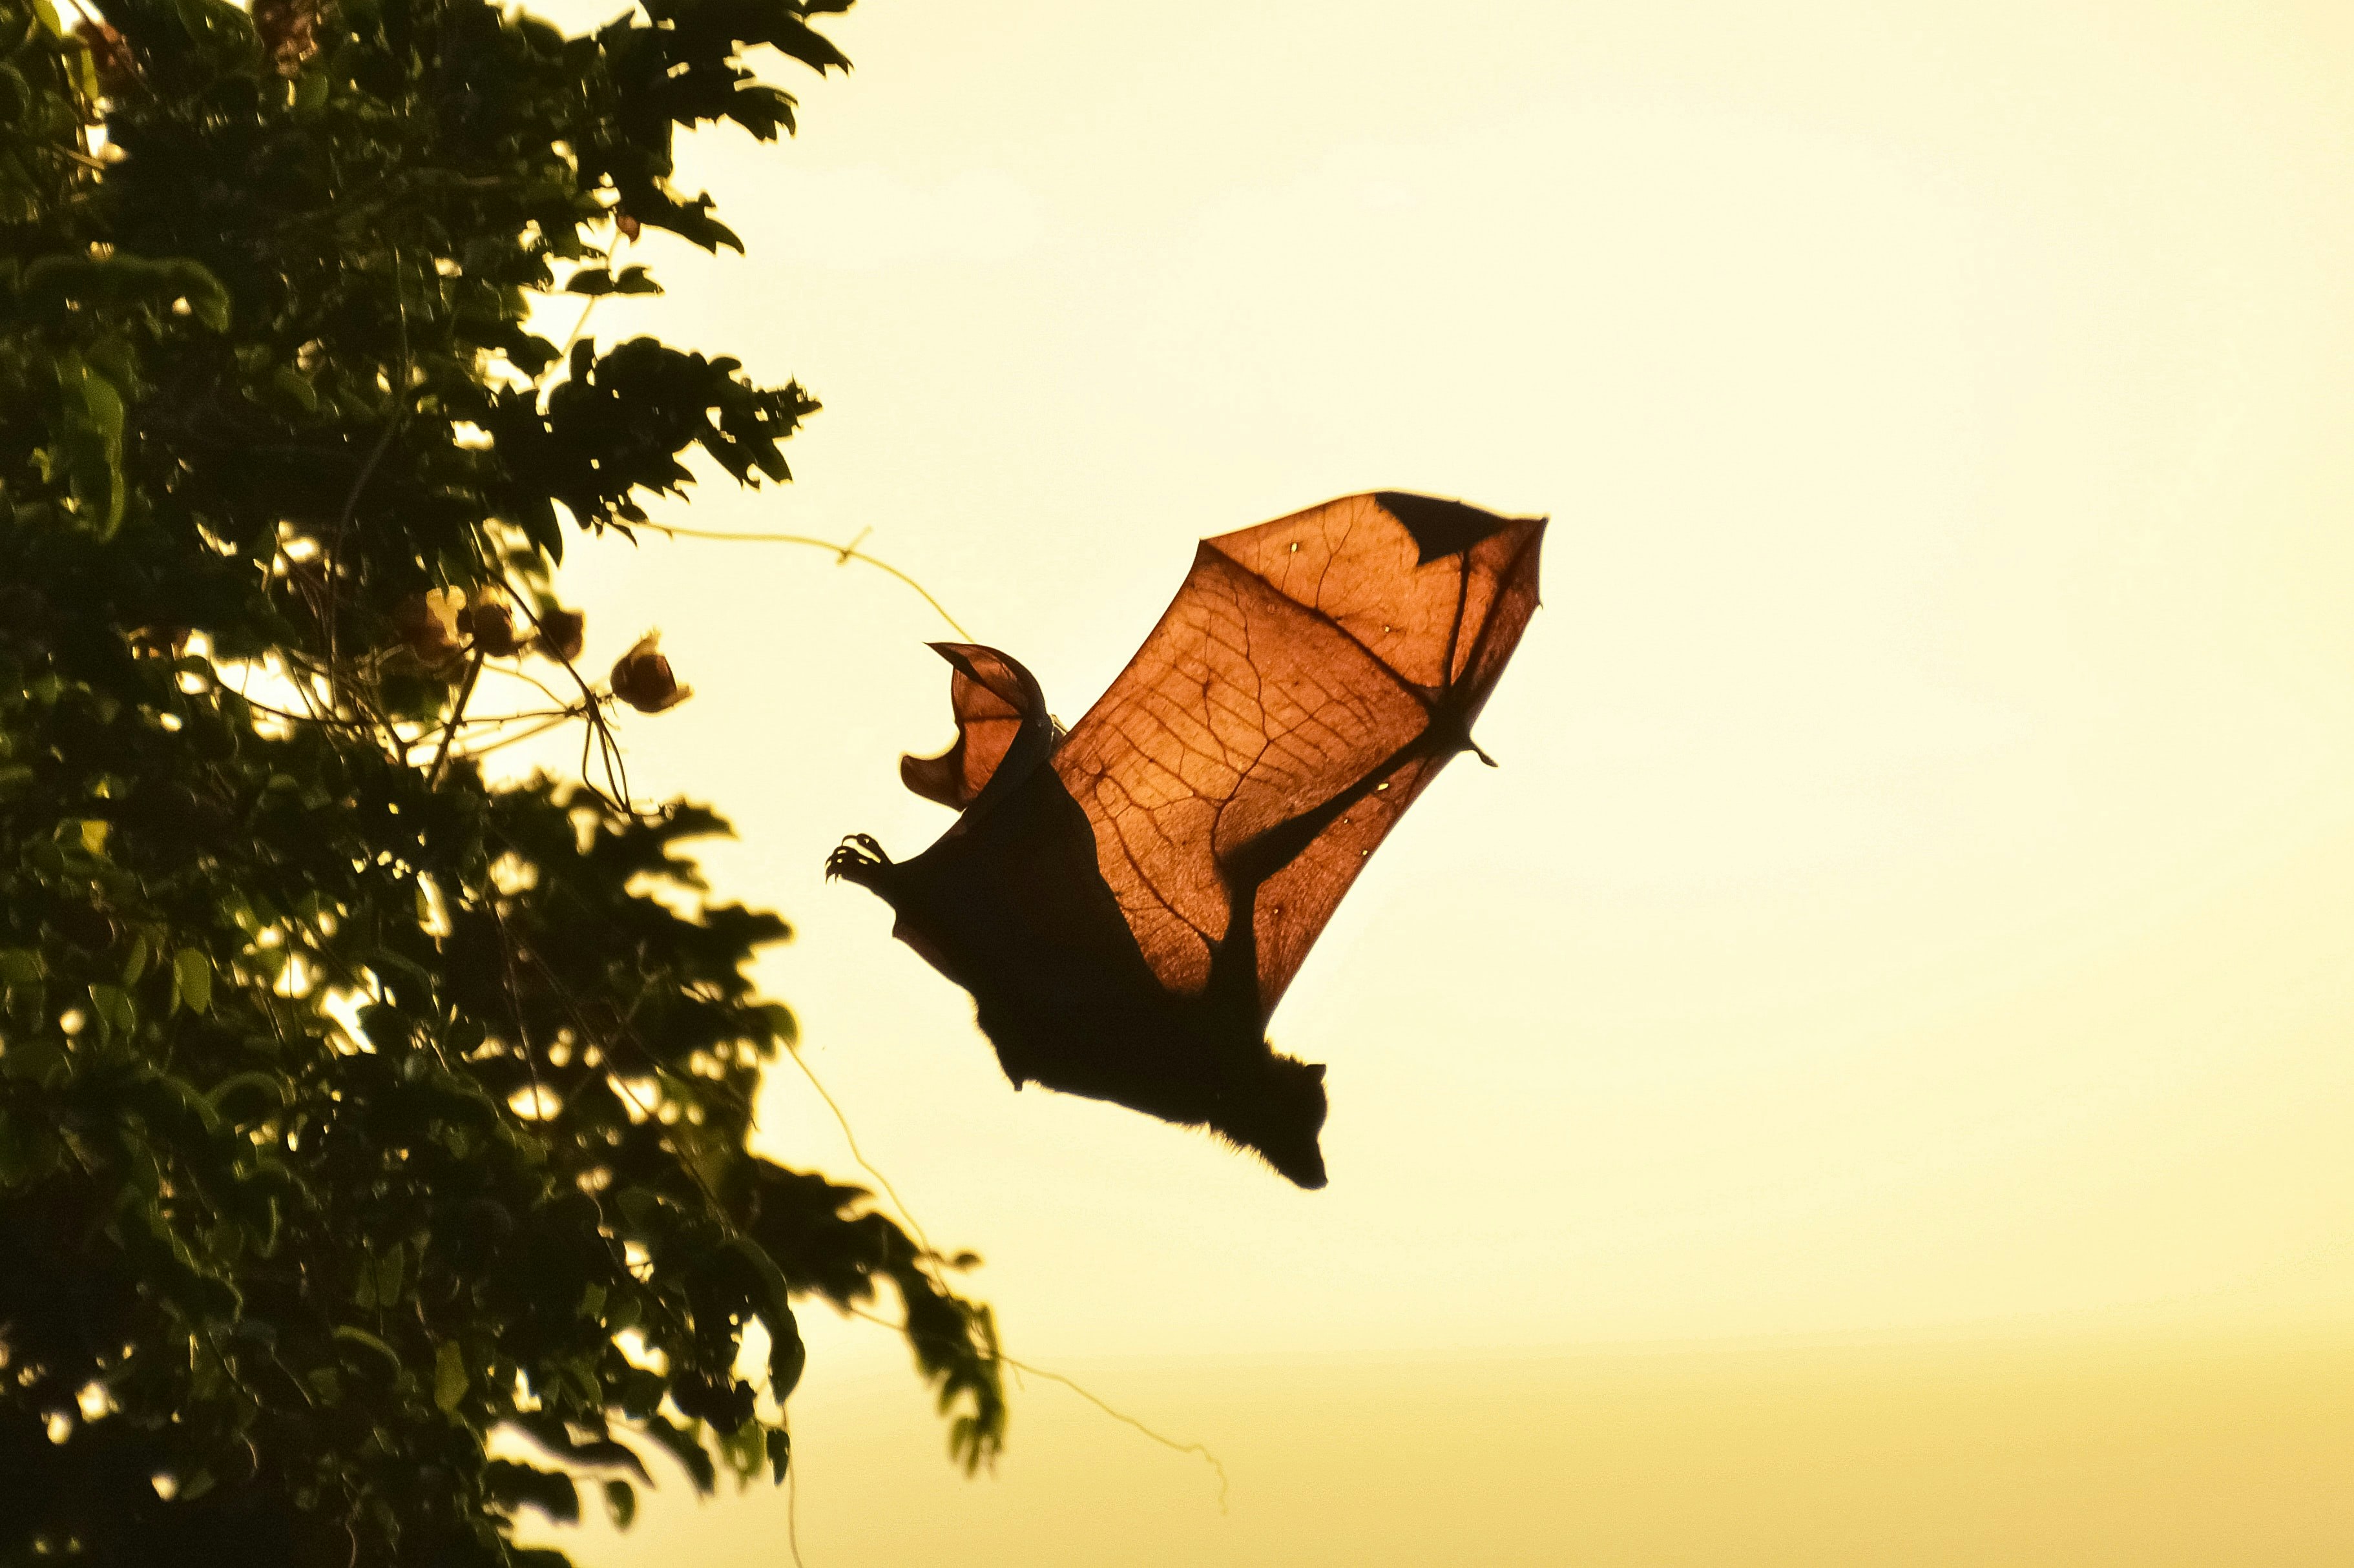 a bat flying out of a tree at dusk